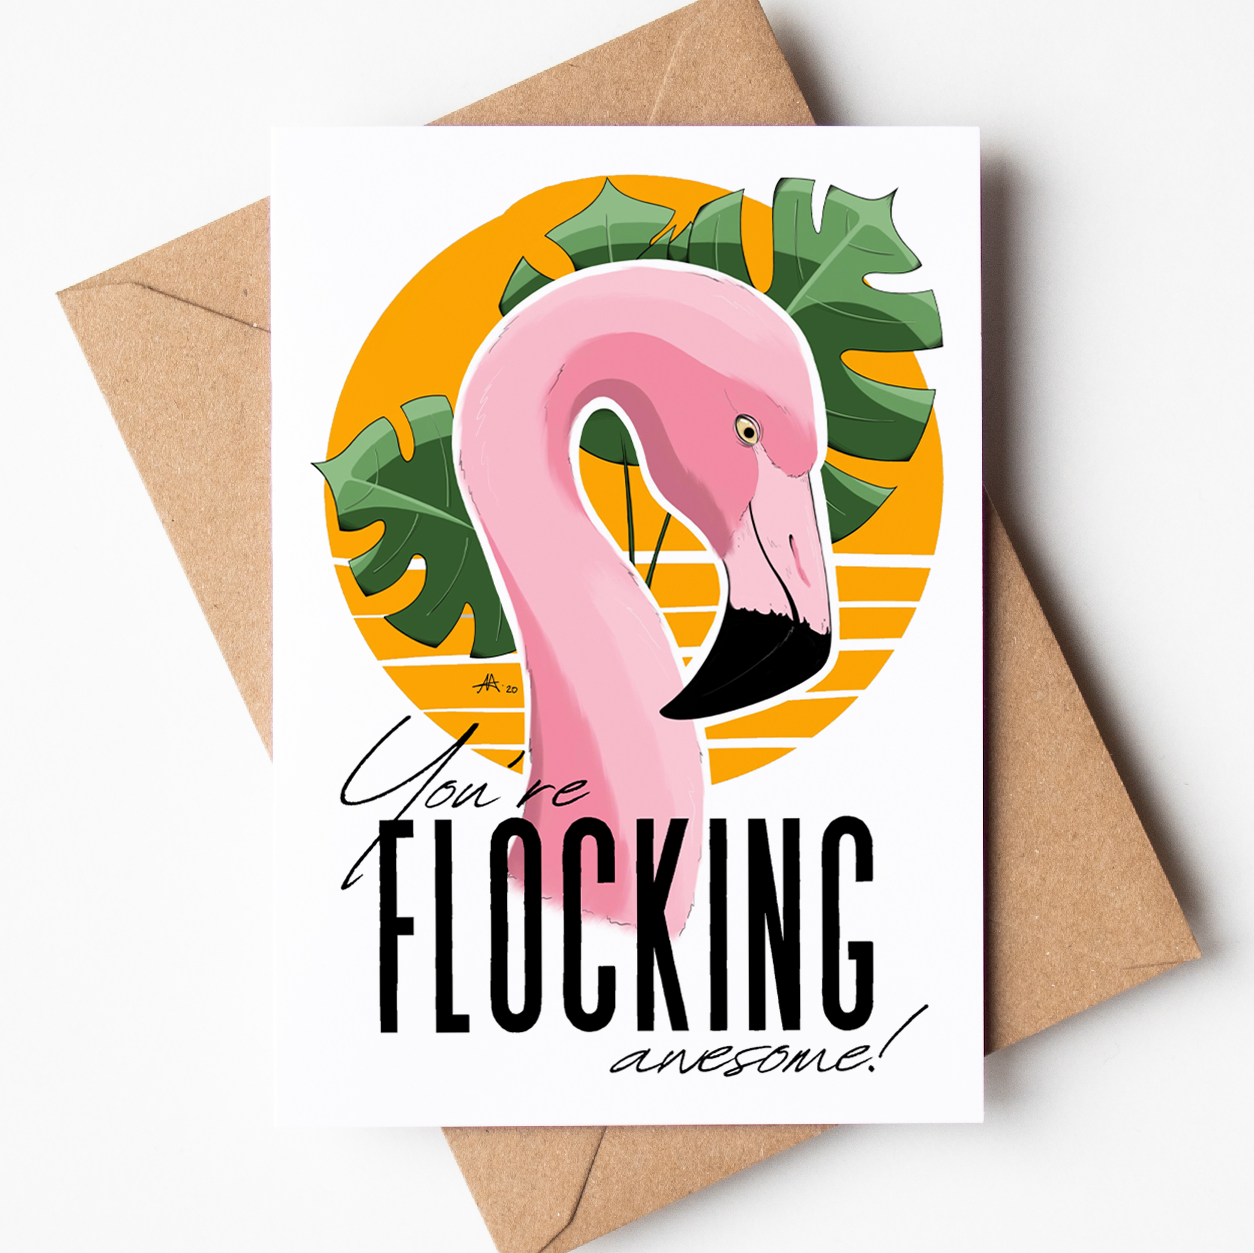 "You're FLOCKING awesome!" - Greeting Card